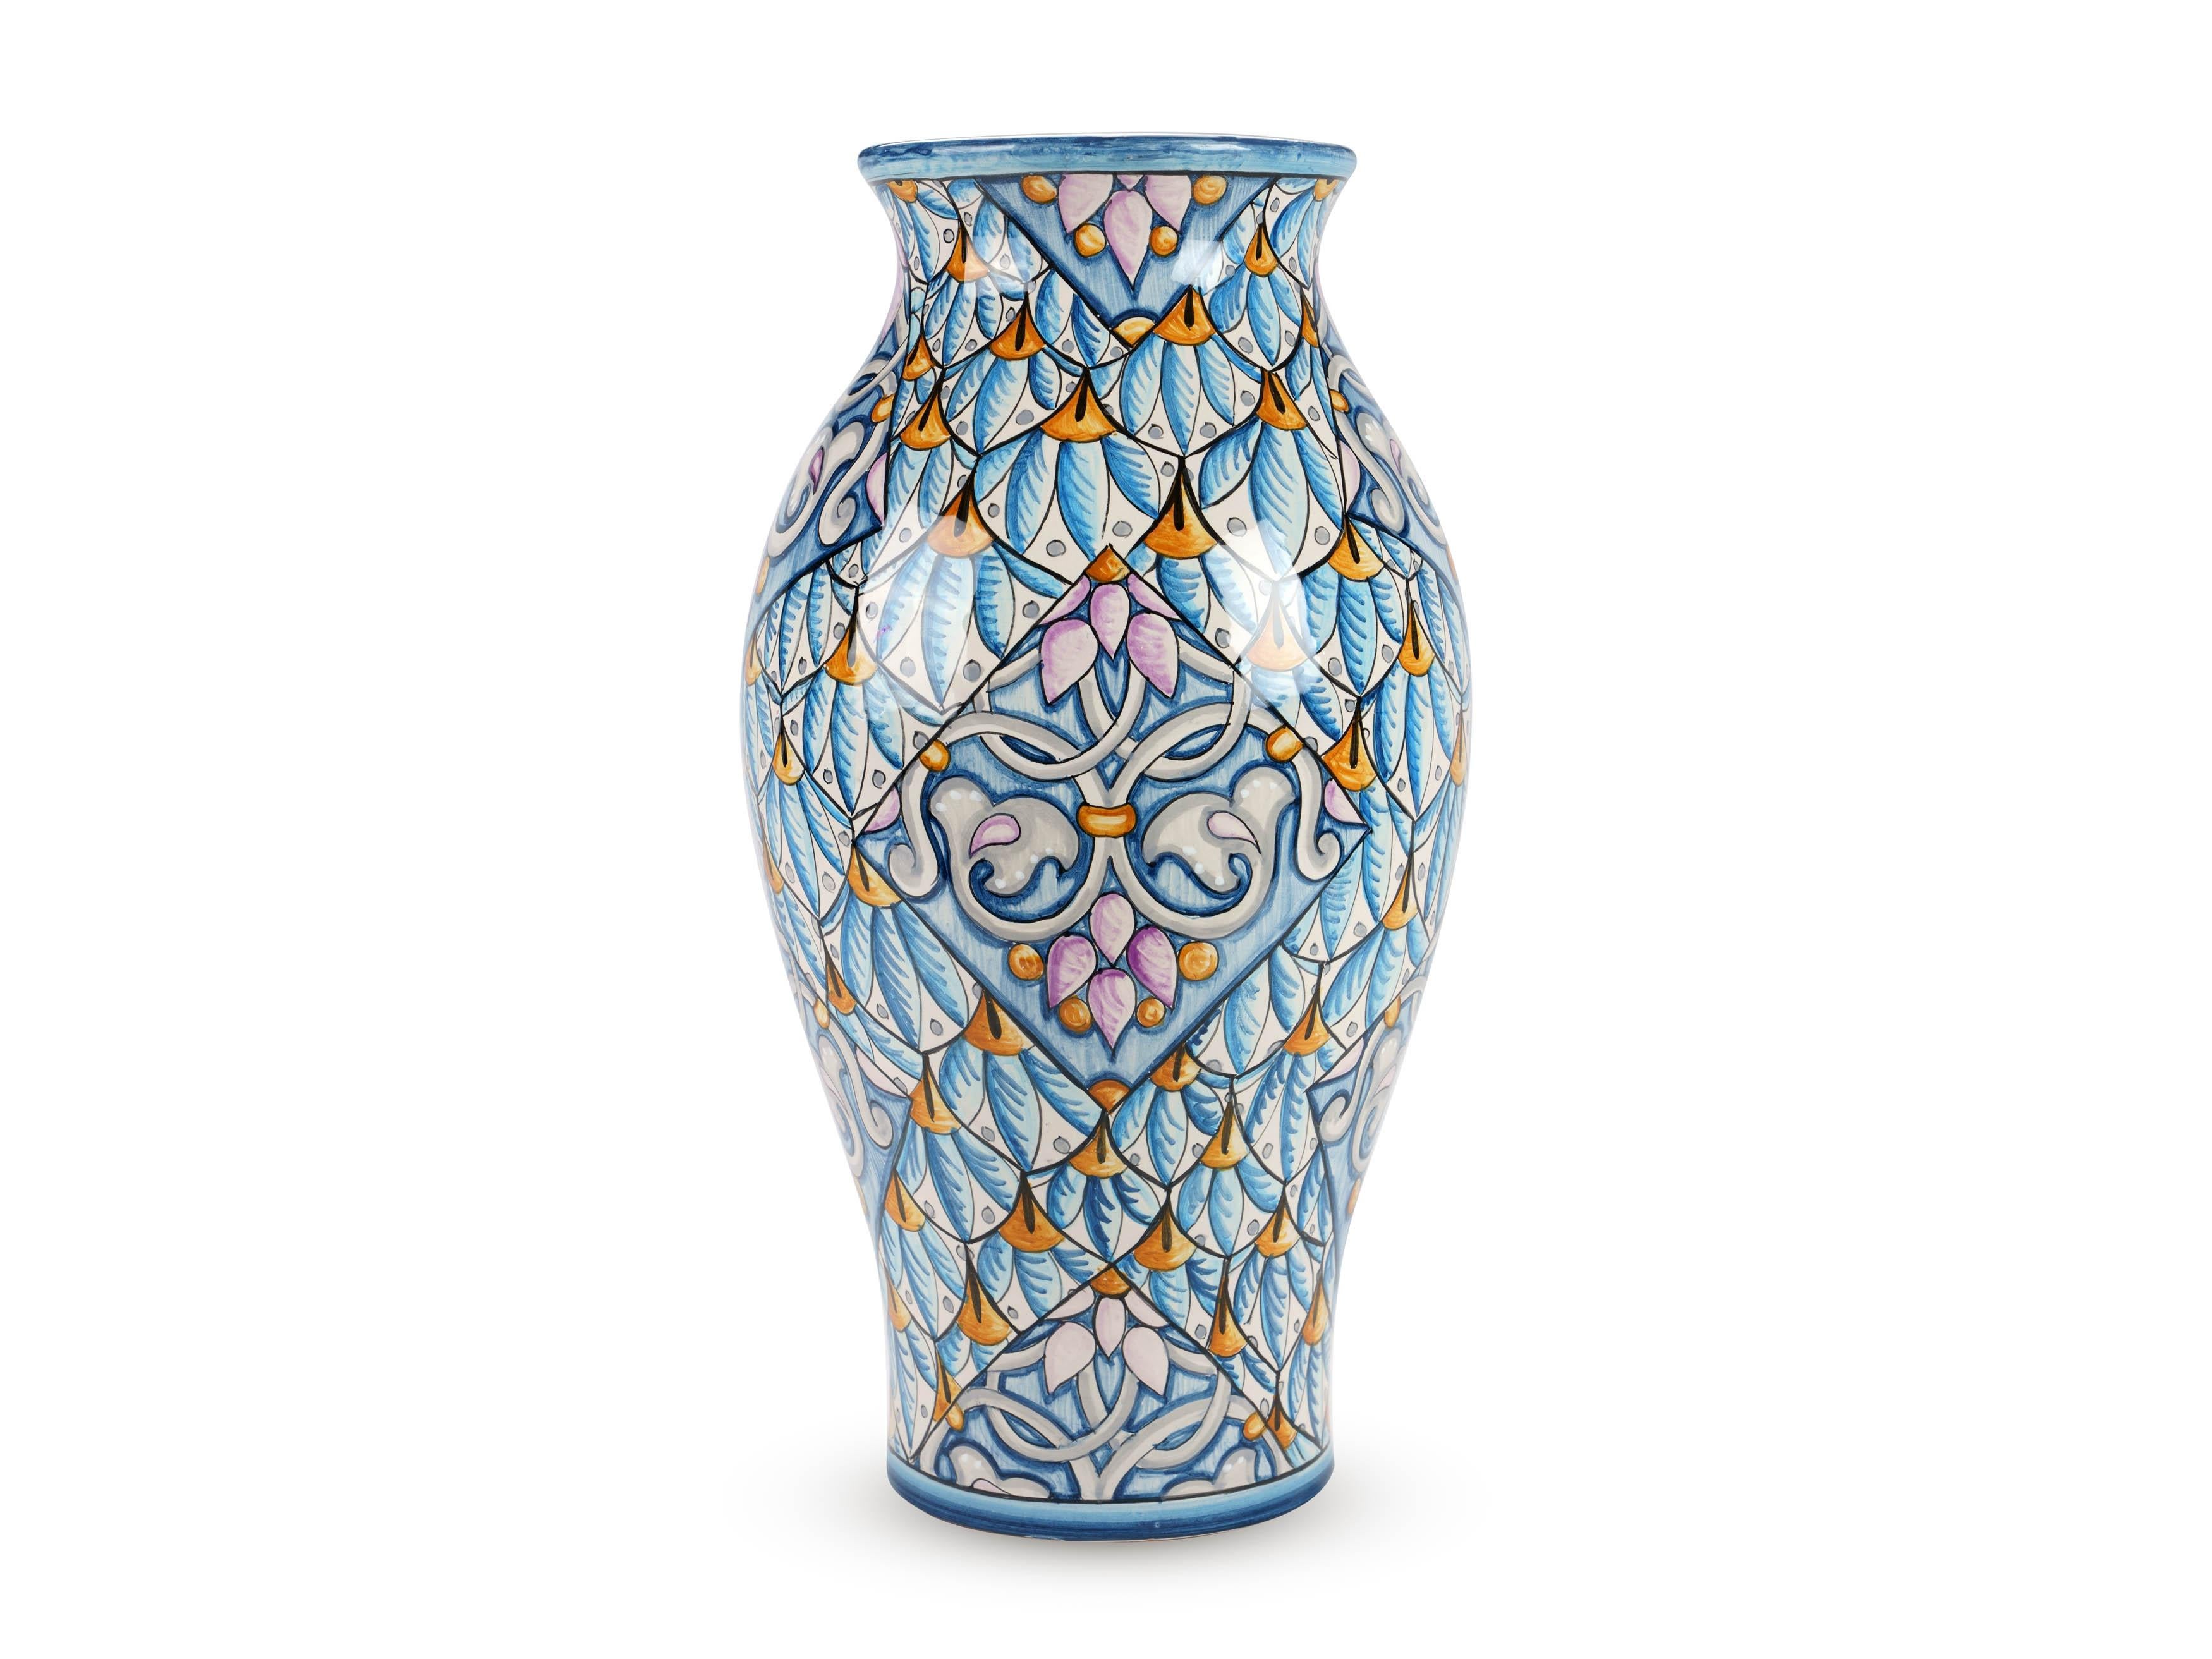 Large decorative vase in light blue majolica, glazed in polychrome, characterized by the elegant presence of ornamental motifs in the shape of feathers which magnificently enhance its shape. Its powerful aesthetic impact is ensured by the